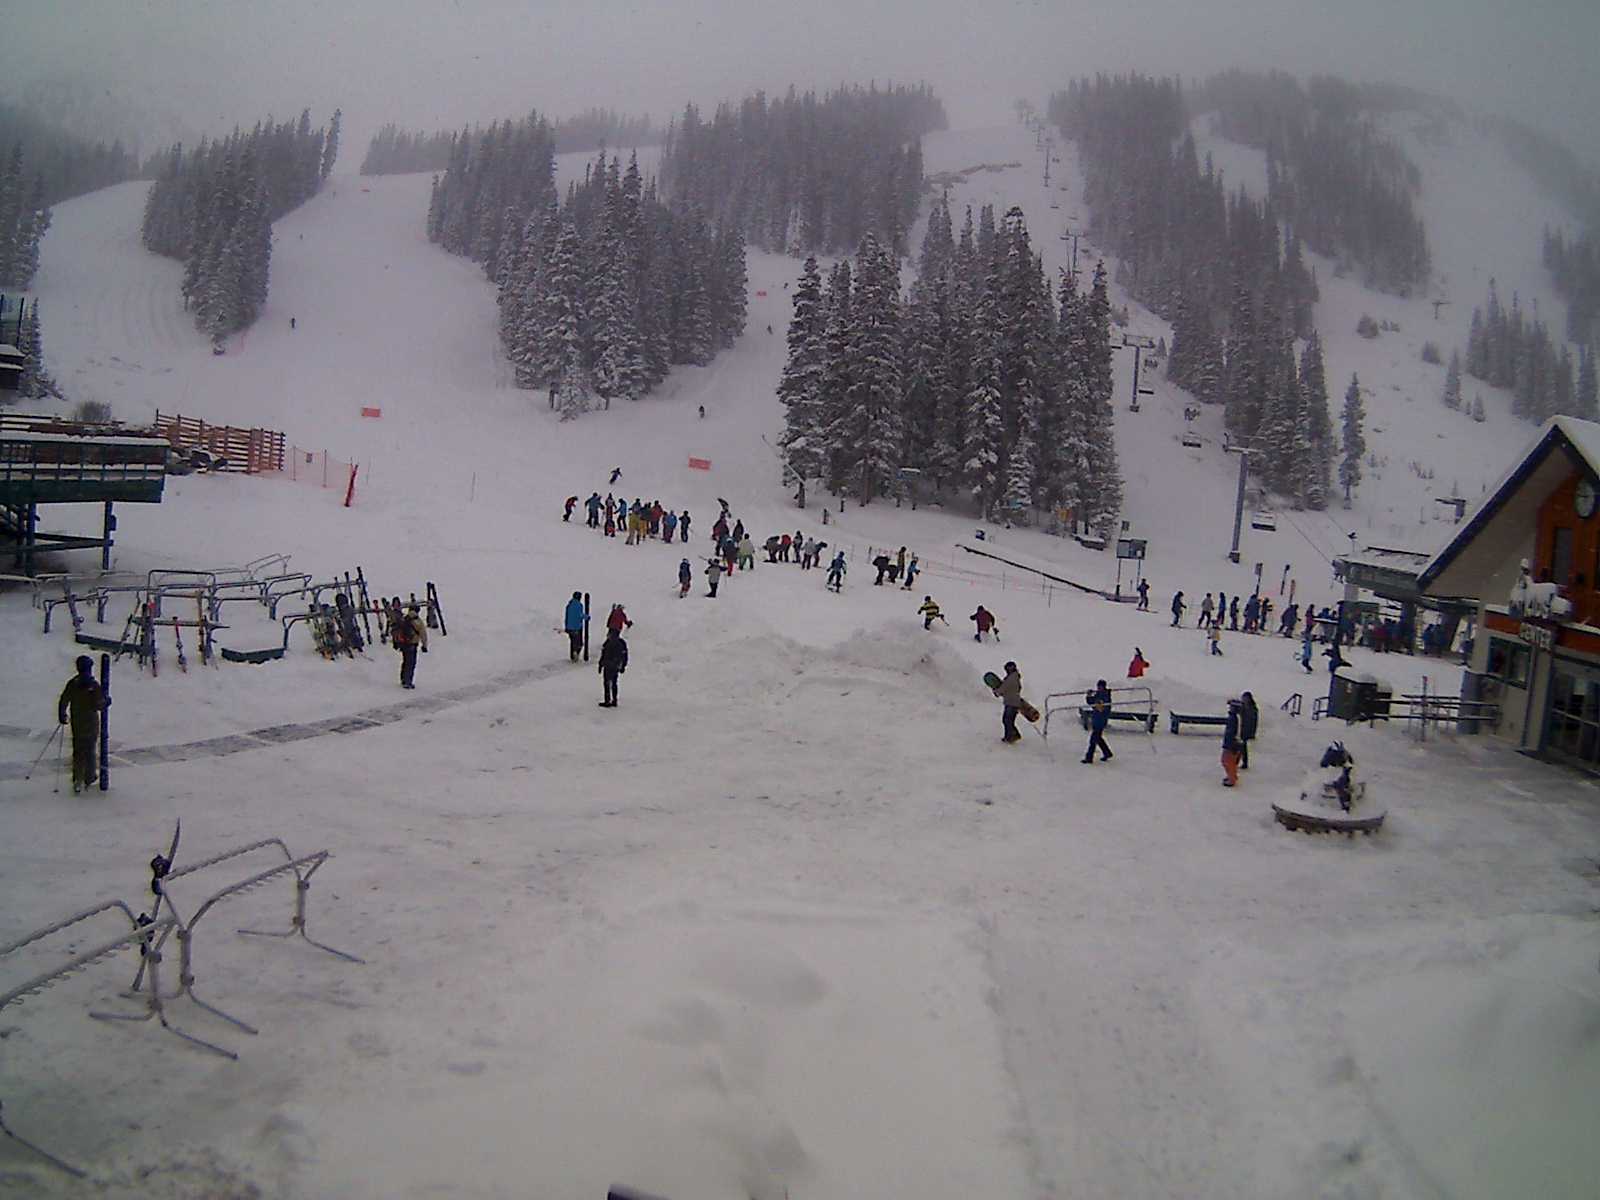 Arapahoe Basin, CO this morning with 10" of new snow.